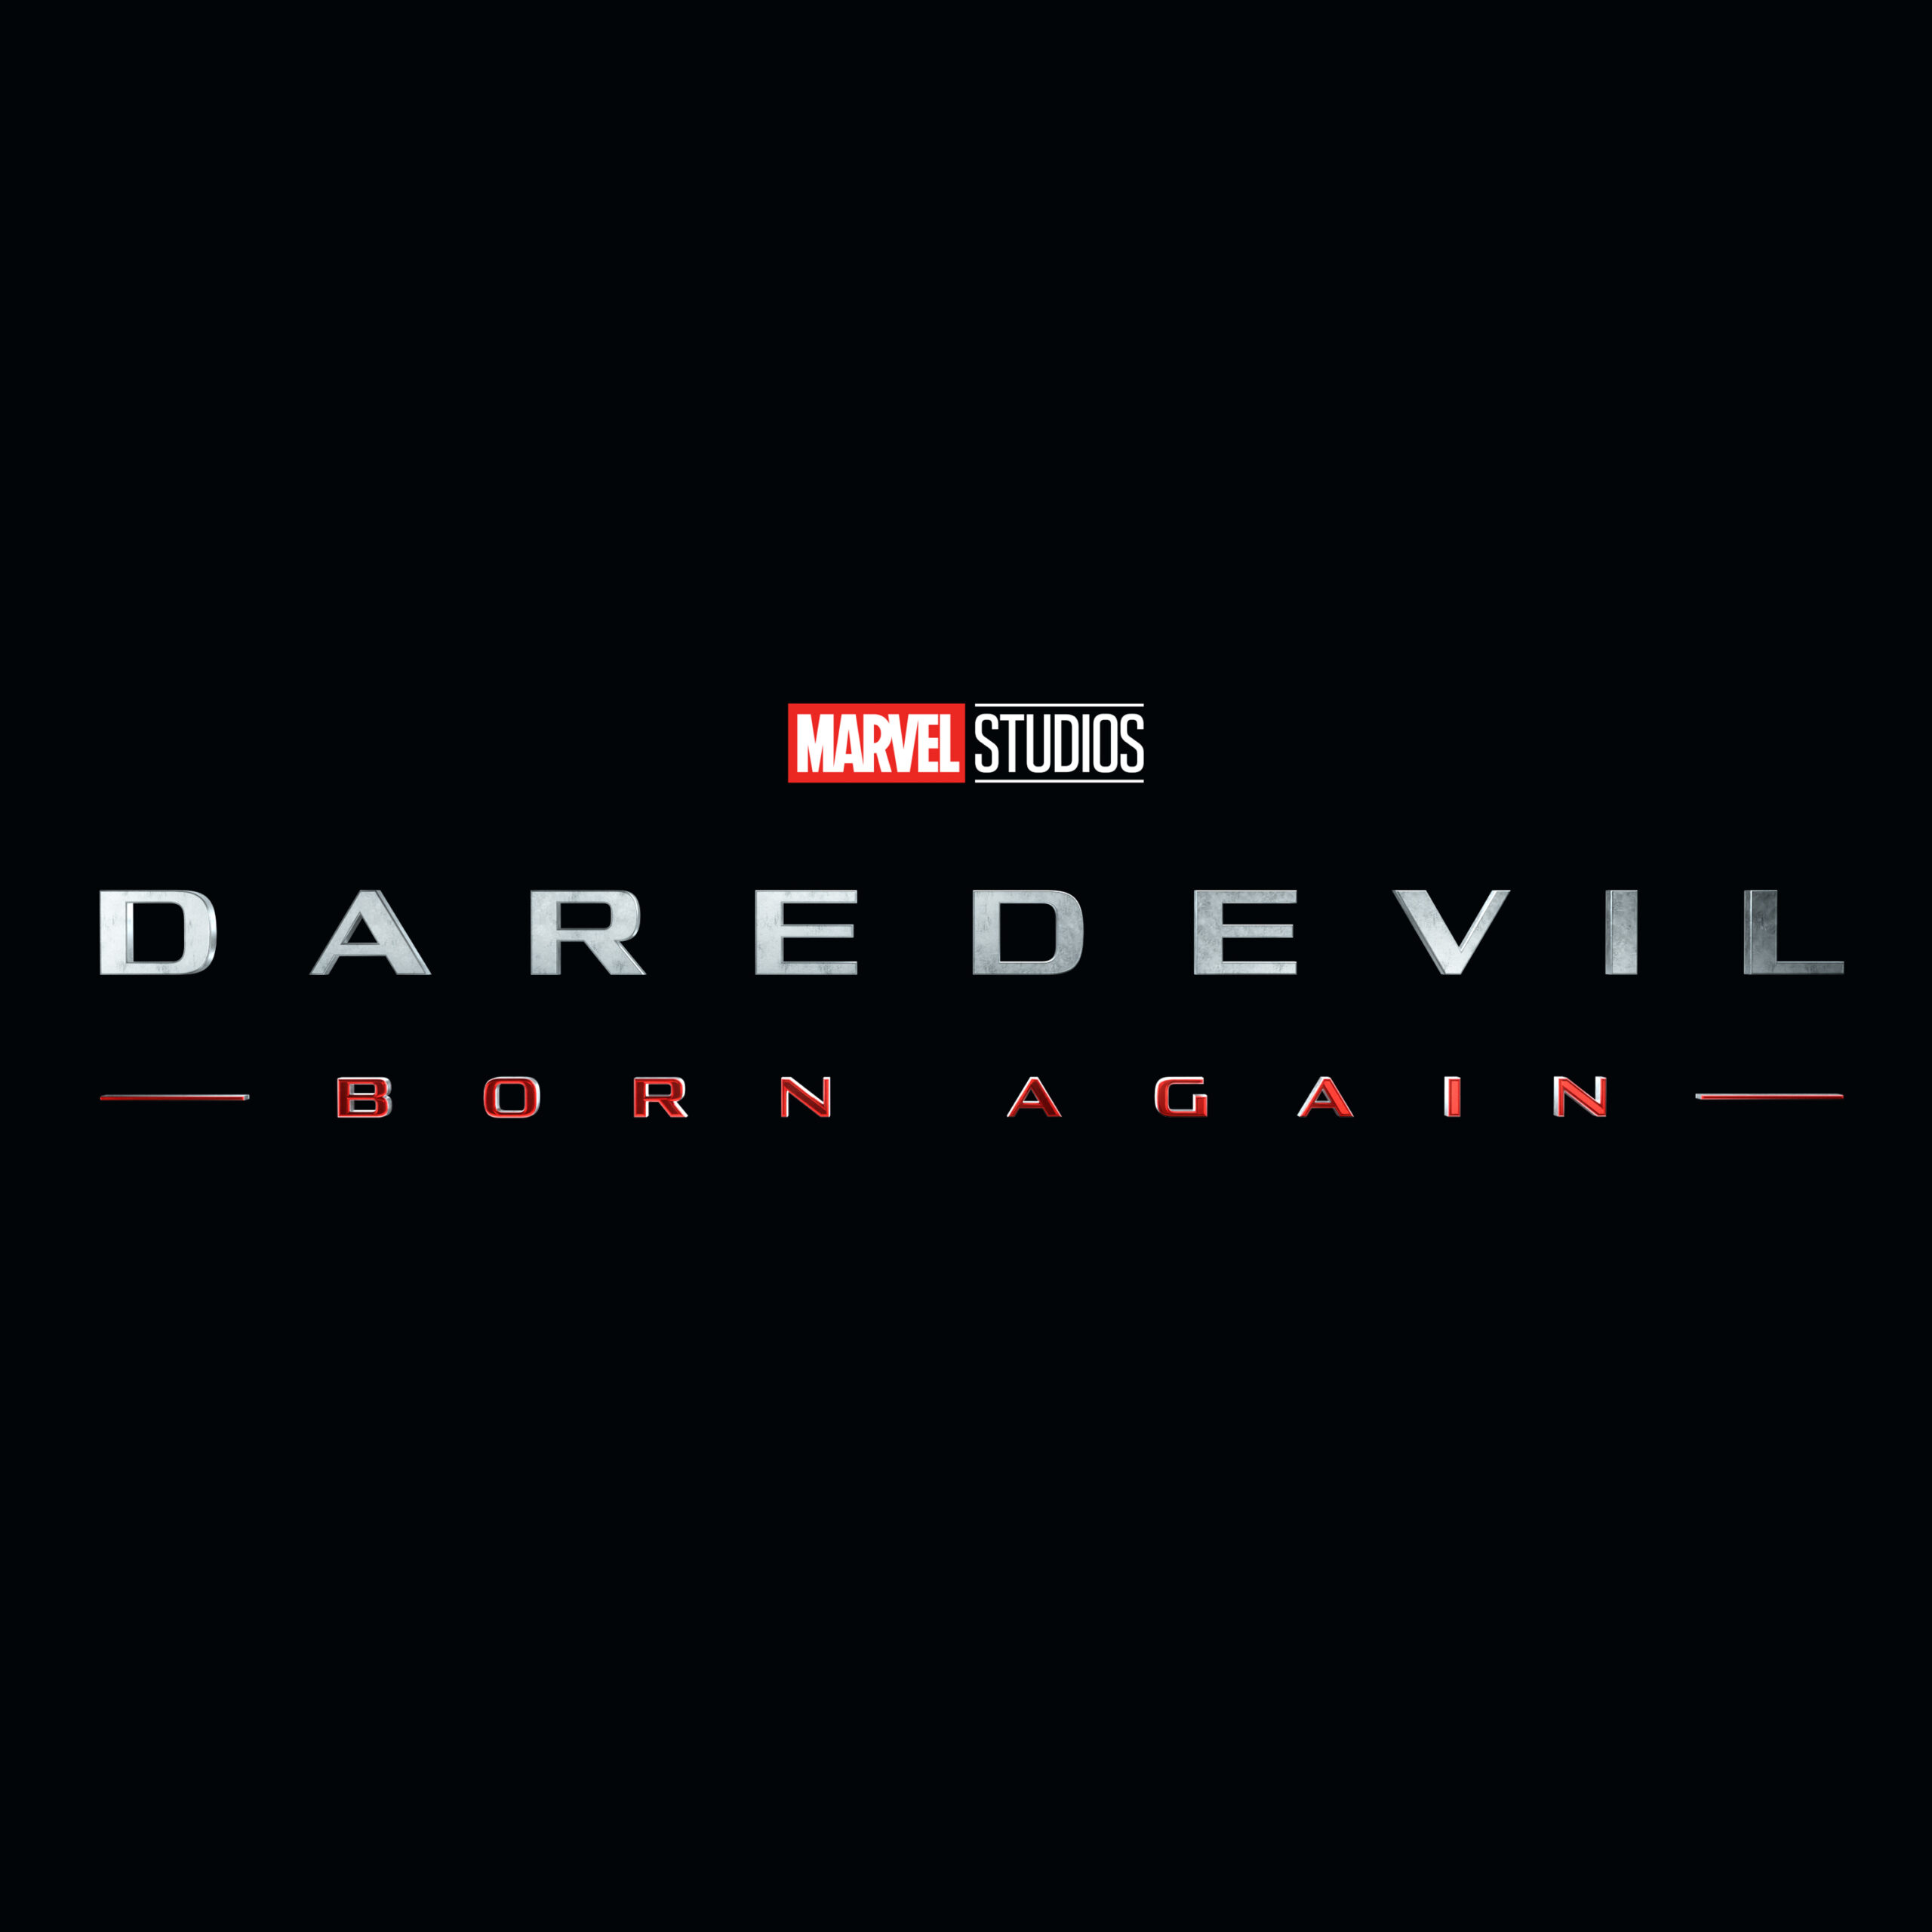 Daredevil: Born Again news broke over the weekend revealing the premiere director plus the news of a Vanessa recast.